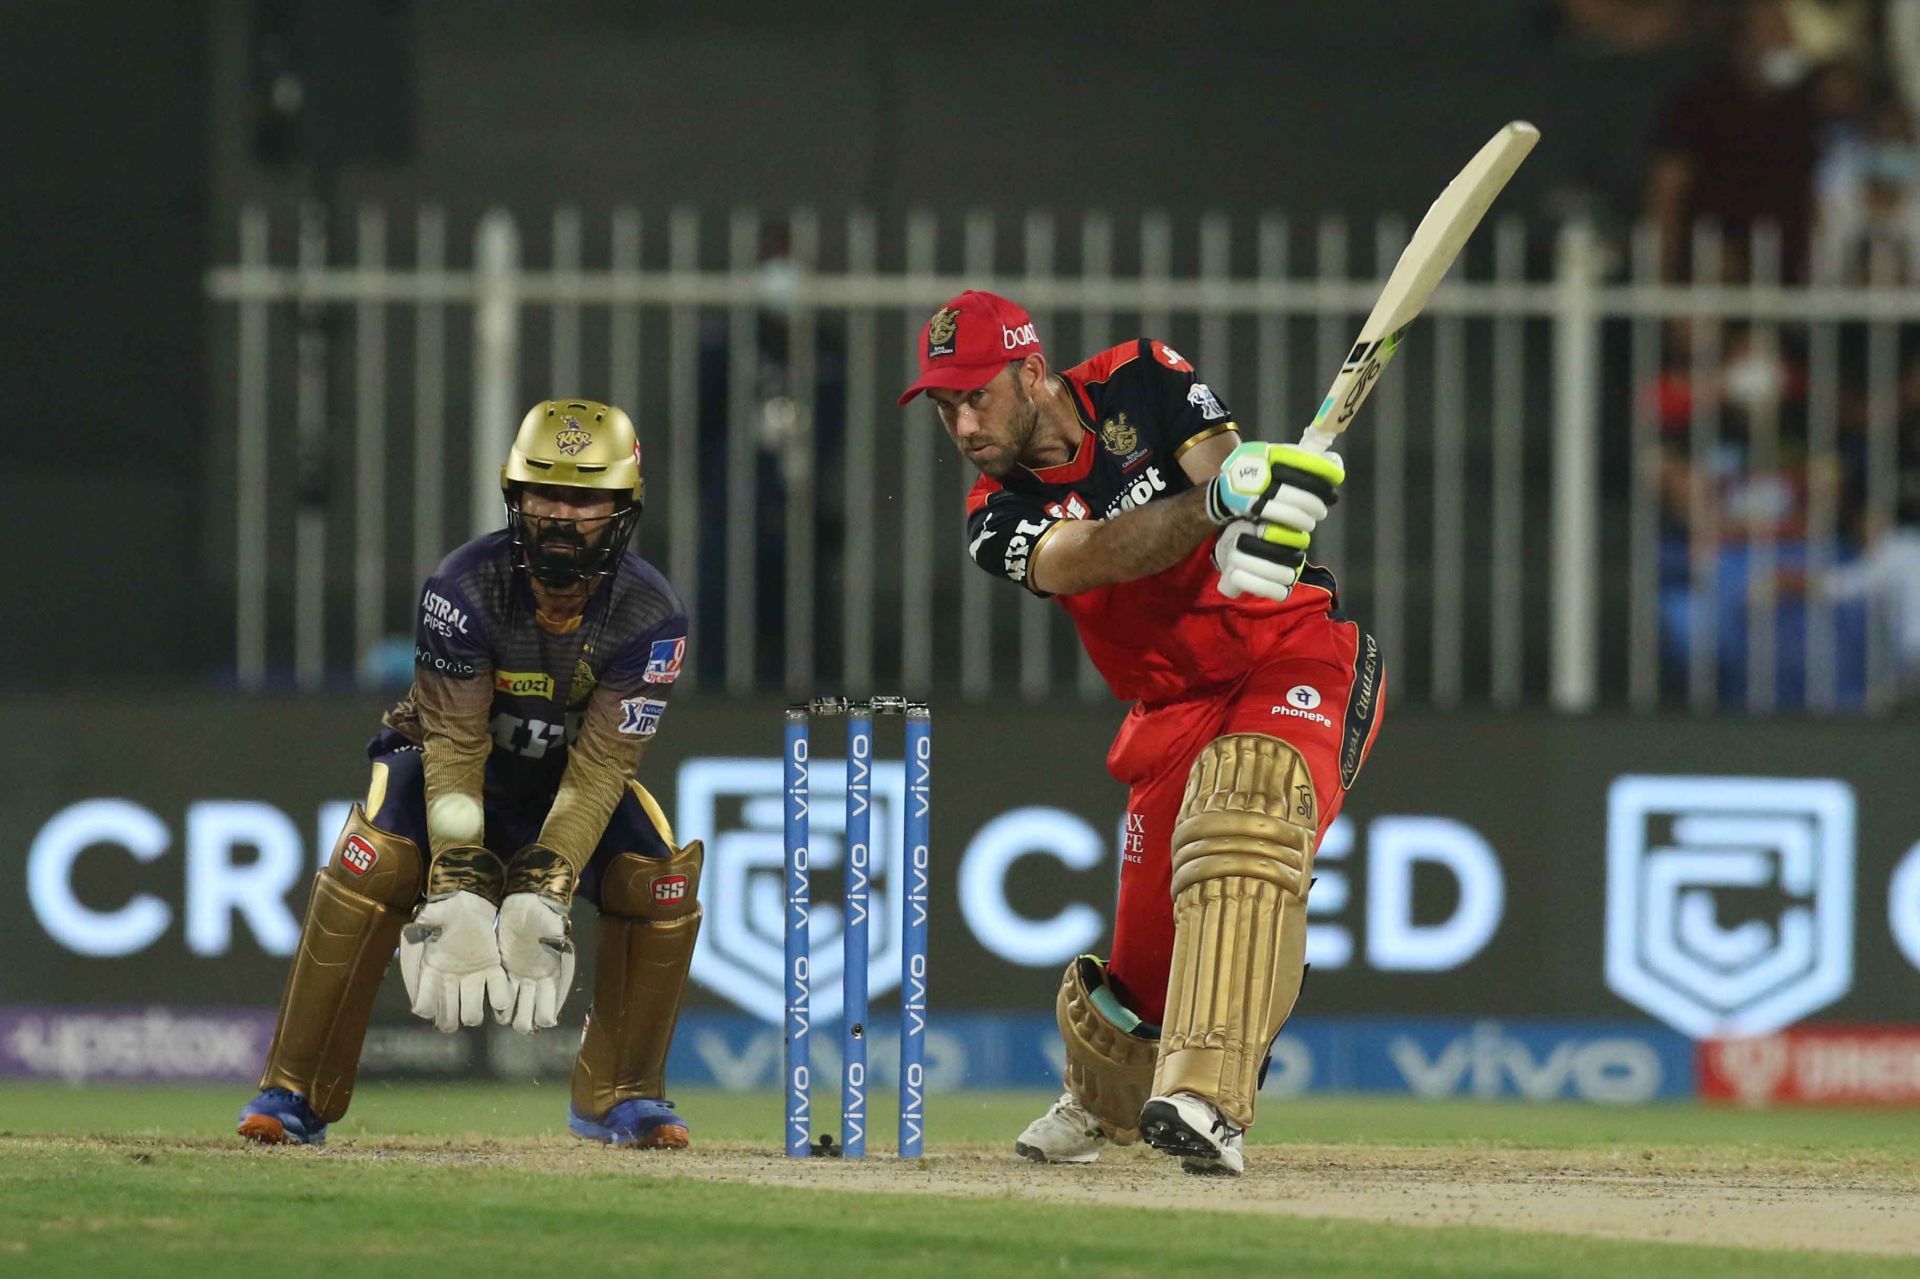 Glenn Maxwell joined the Royal Challengers Bangalore ahead of IPL 2021 (Image Courtesy: IPLT20.com)